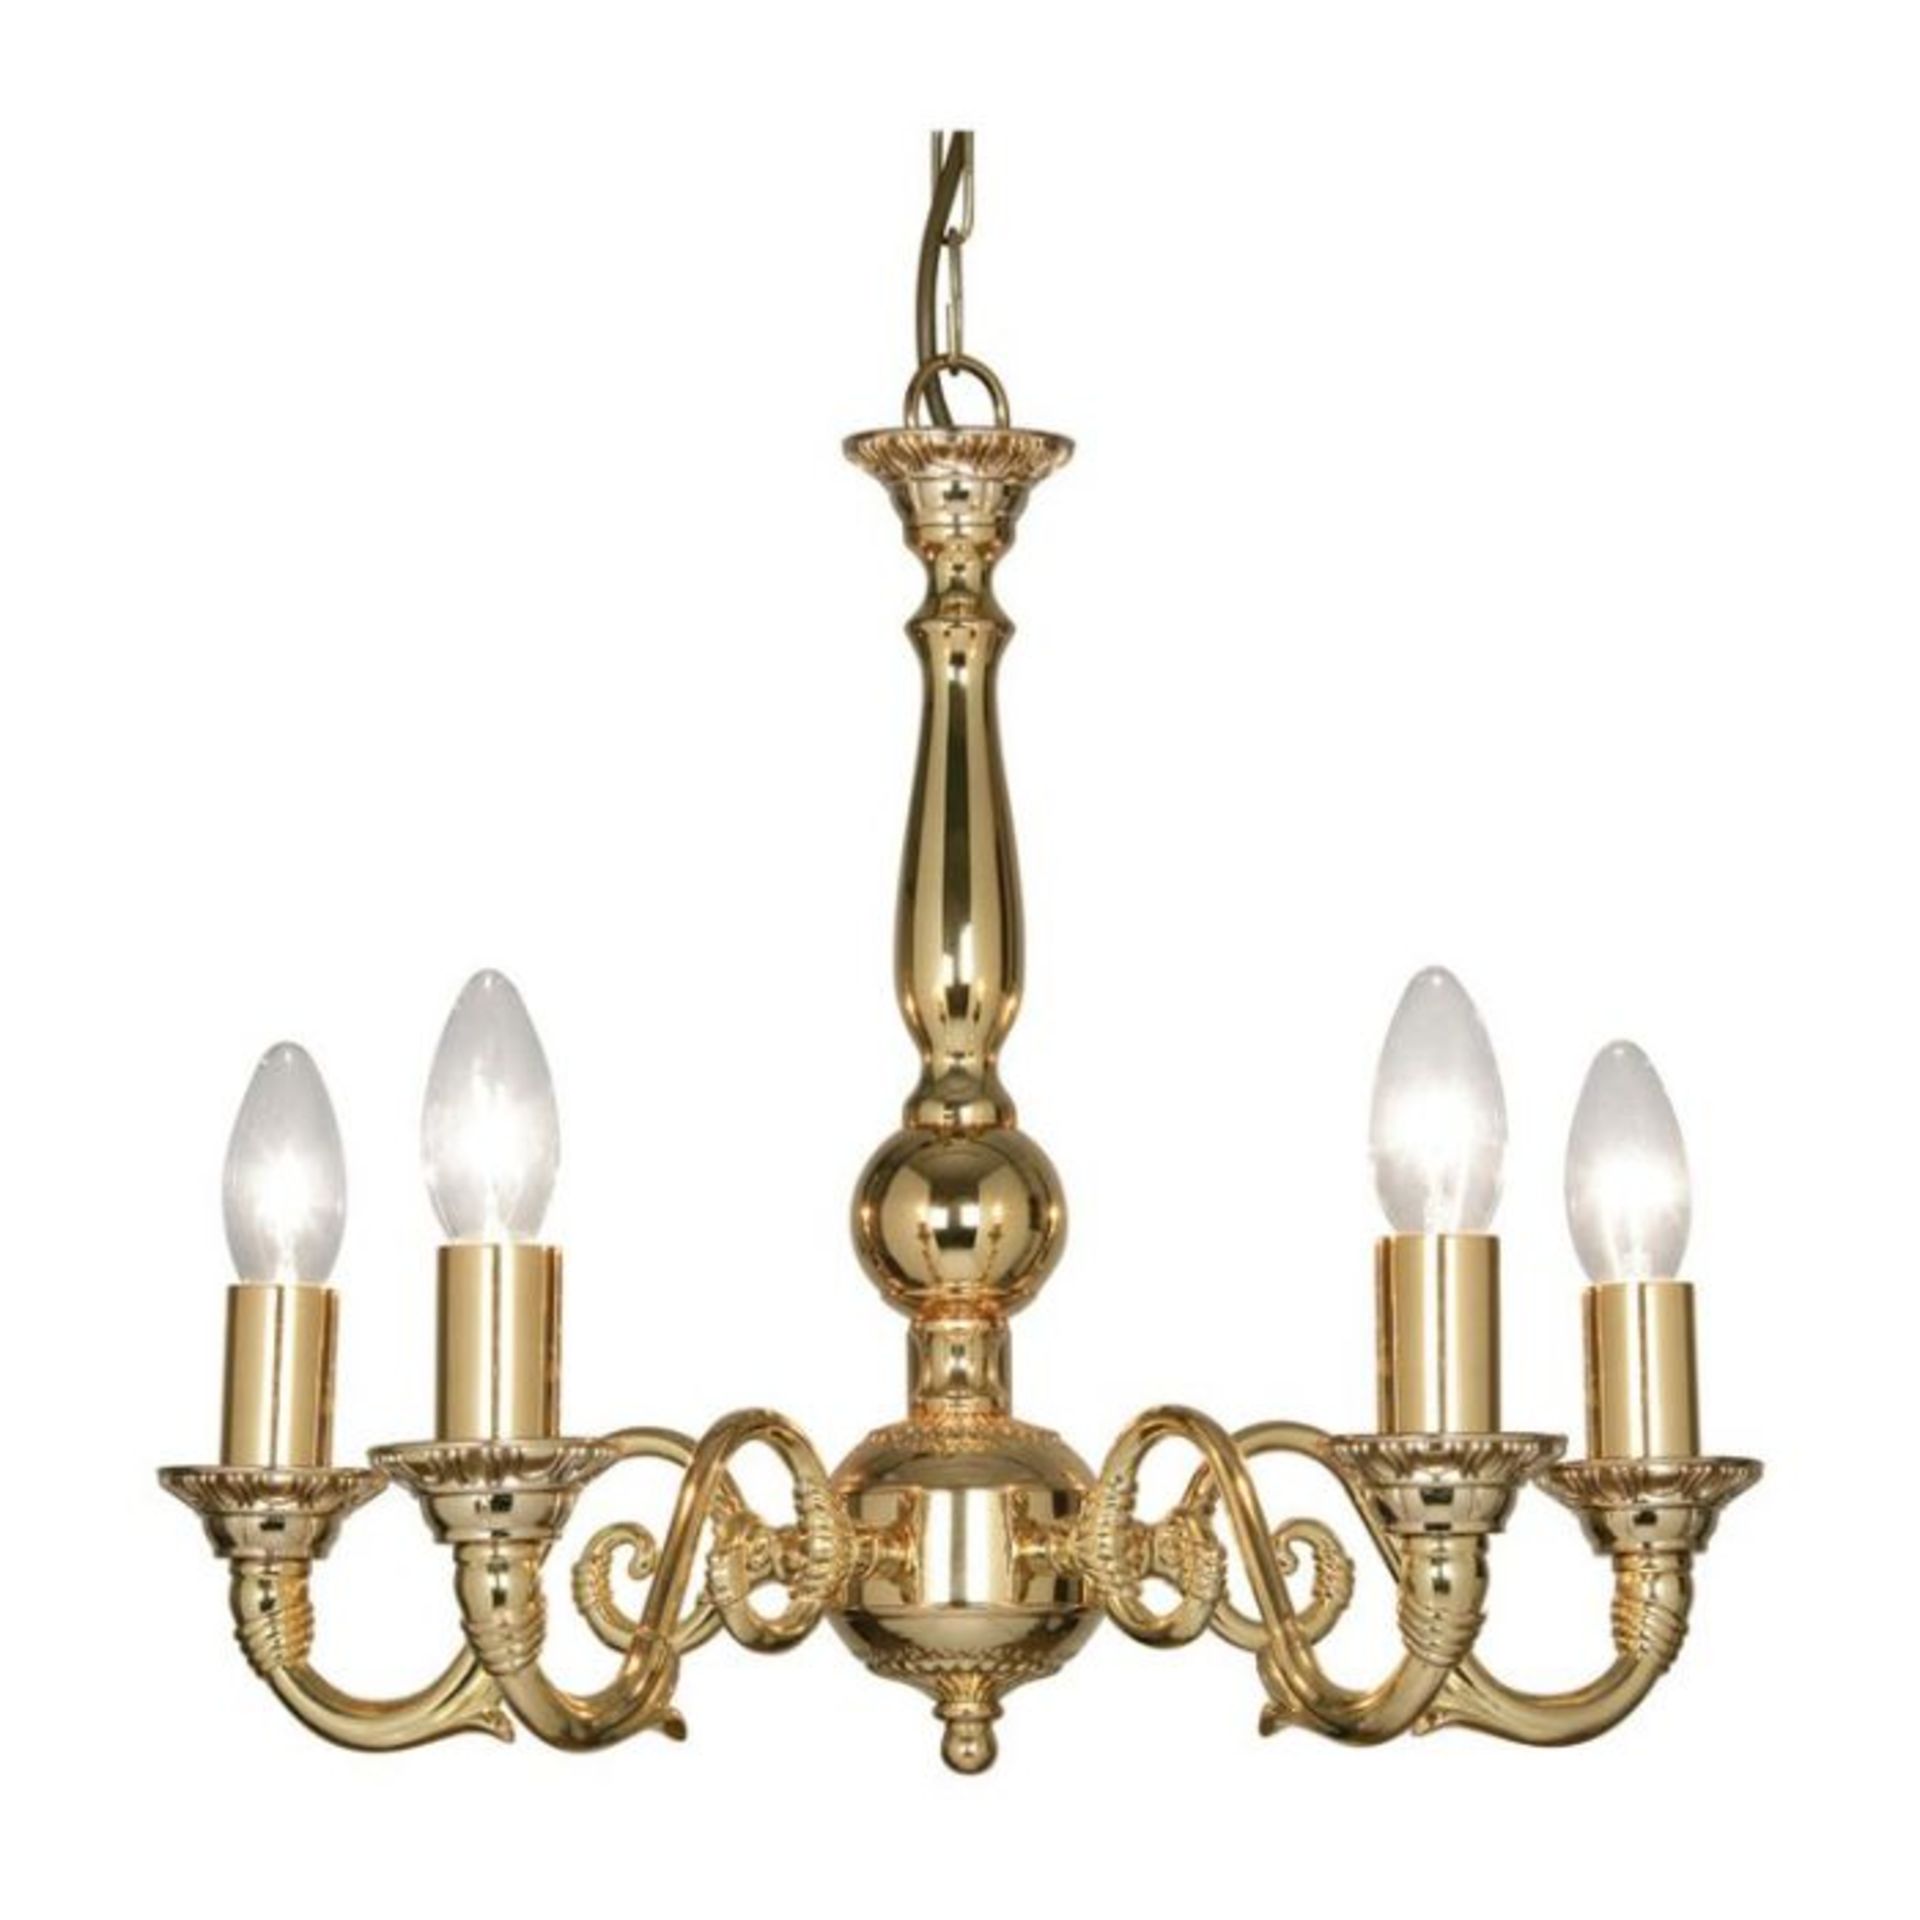 Astoria Grand, Drewett 4 Light Candle Style Chandelier (GOLD PLATED) - RRP £132.99 (HAZO3502 - 25878